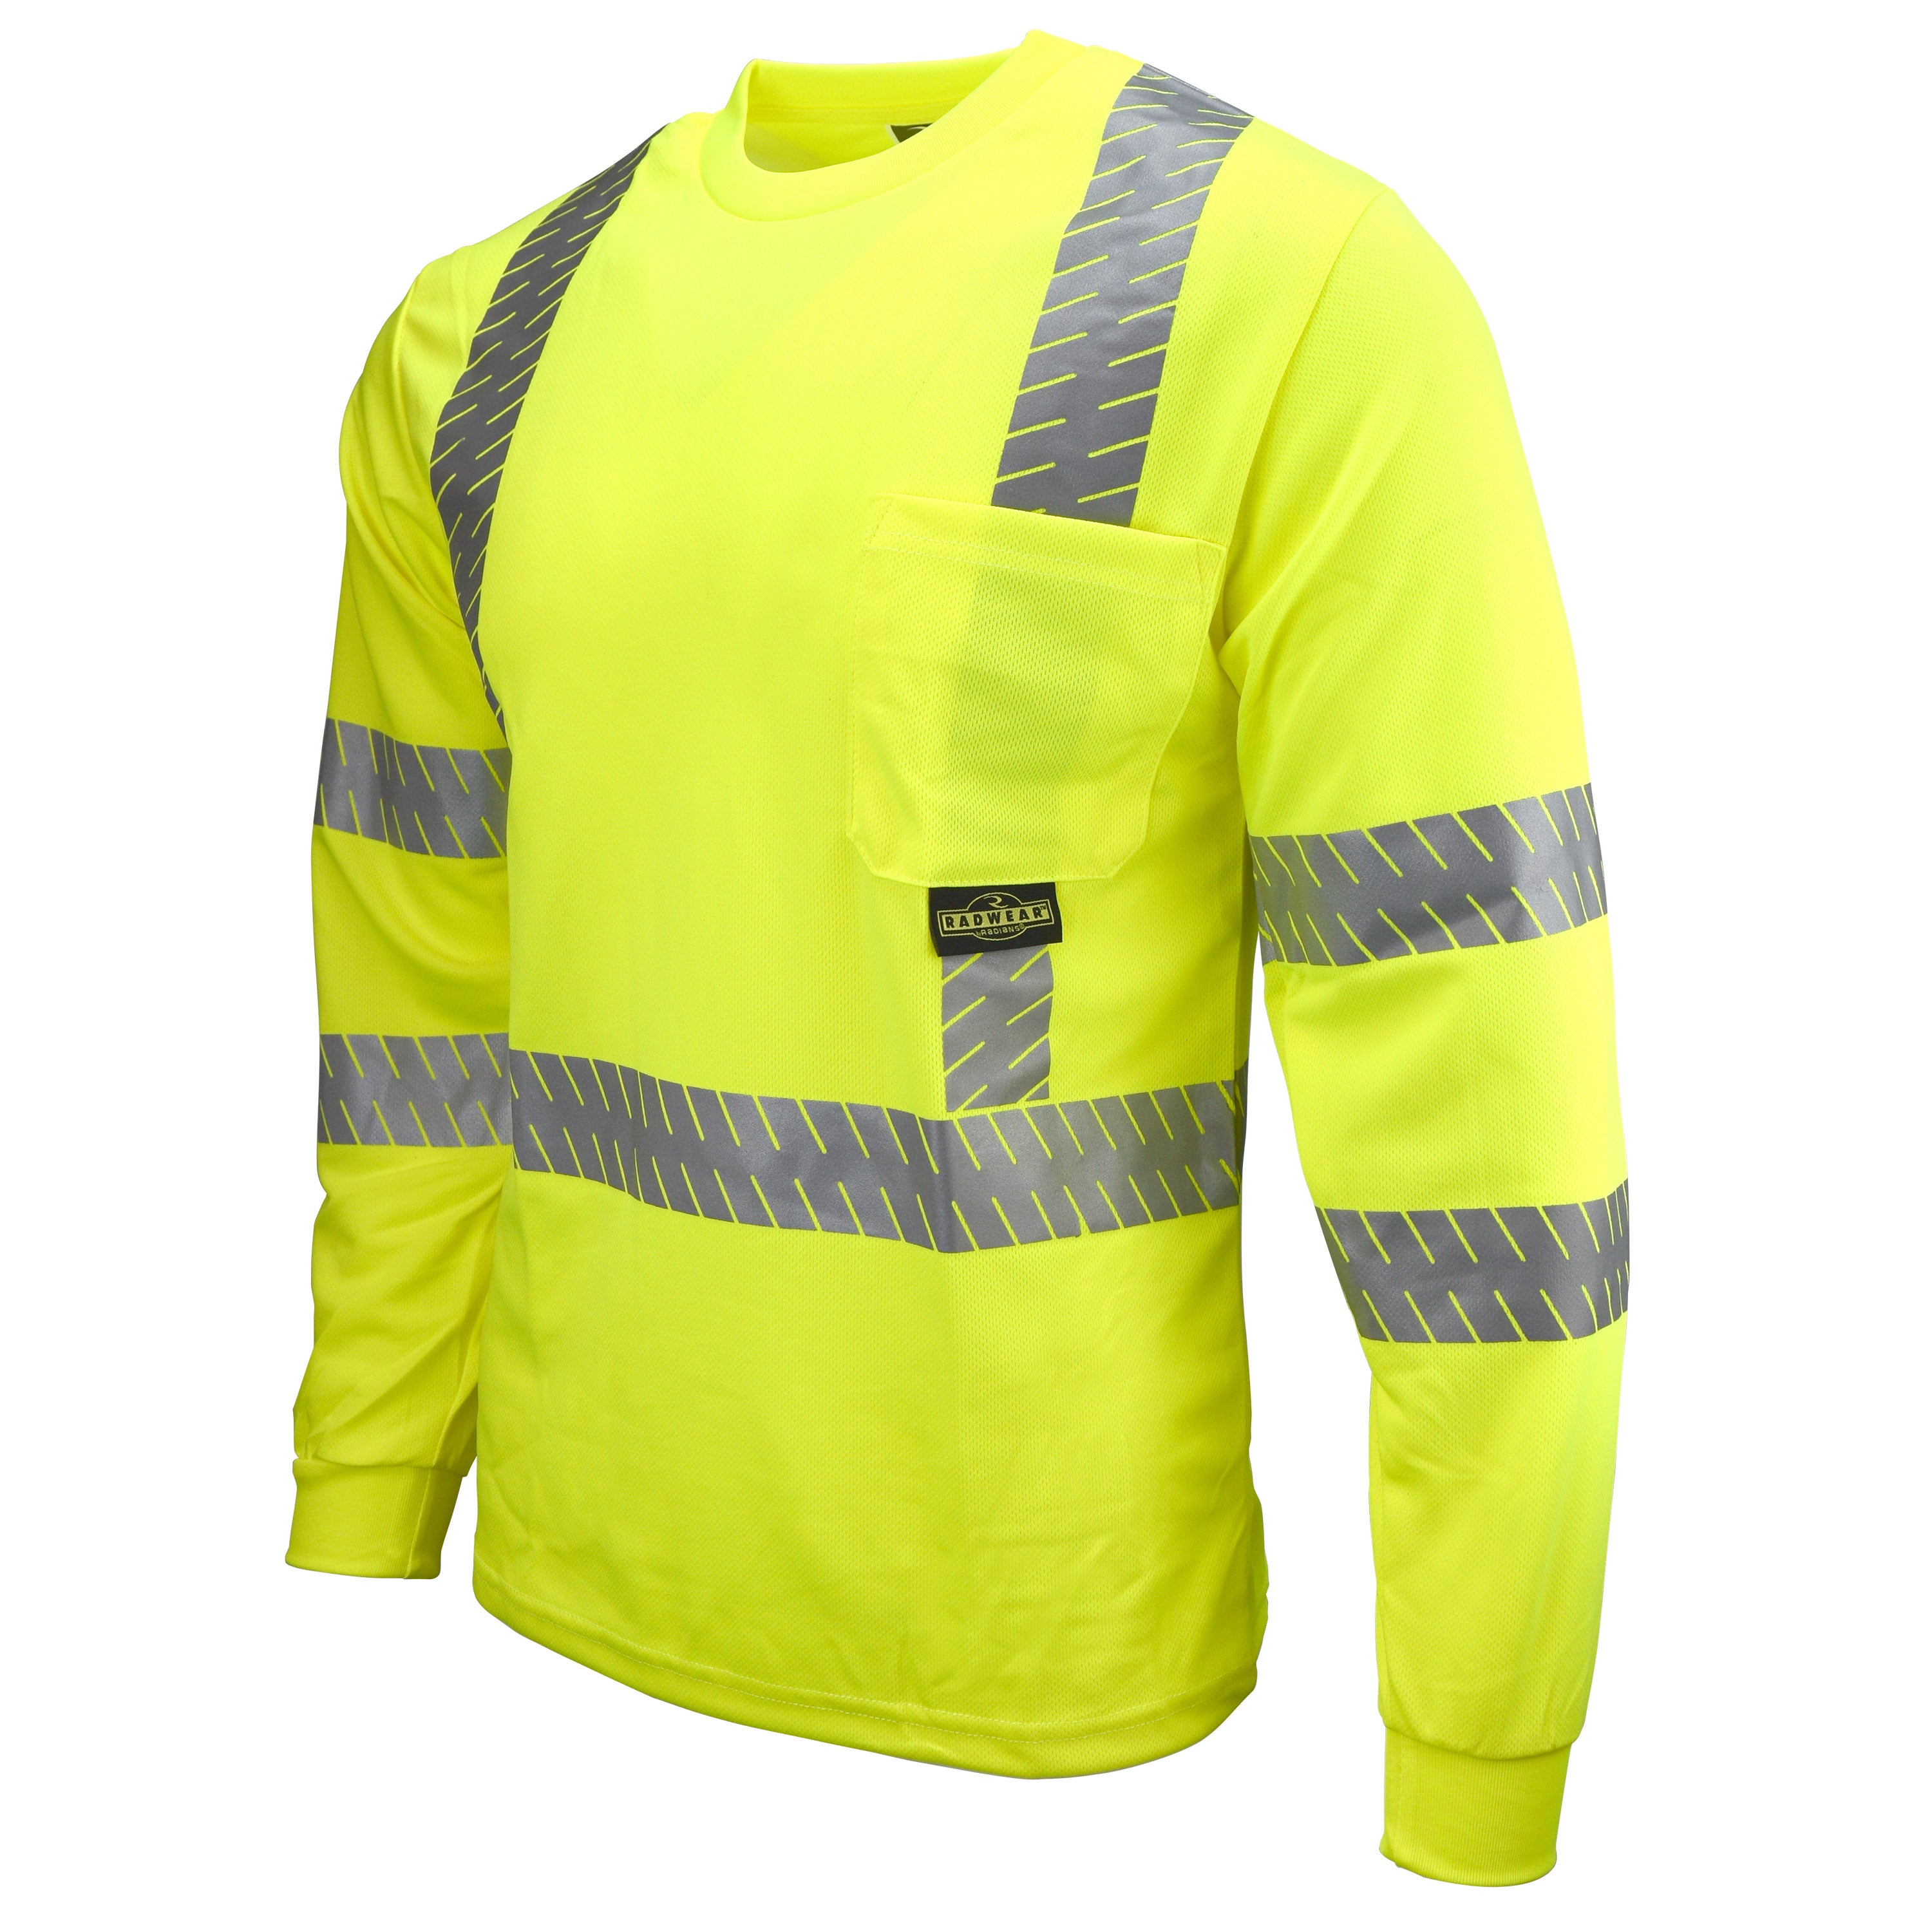 Radians ST24-3 Class 3 High Visibility Long Sleeve Safety T-Shirt with Rad-Shade® UV Protection-eSafety Supplies, Inc